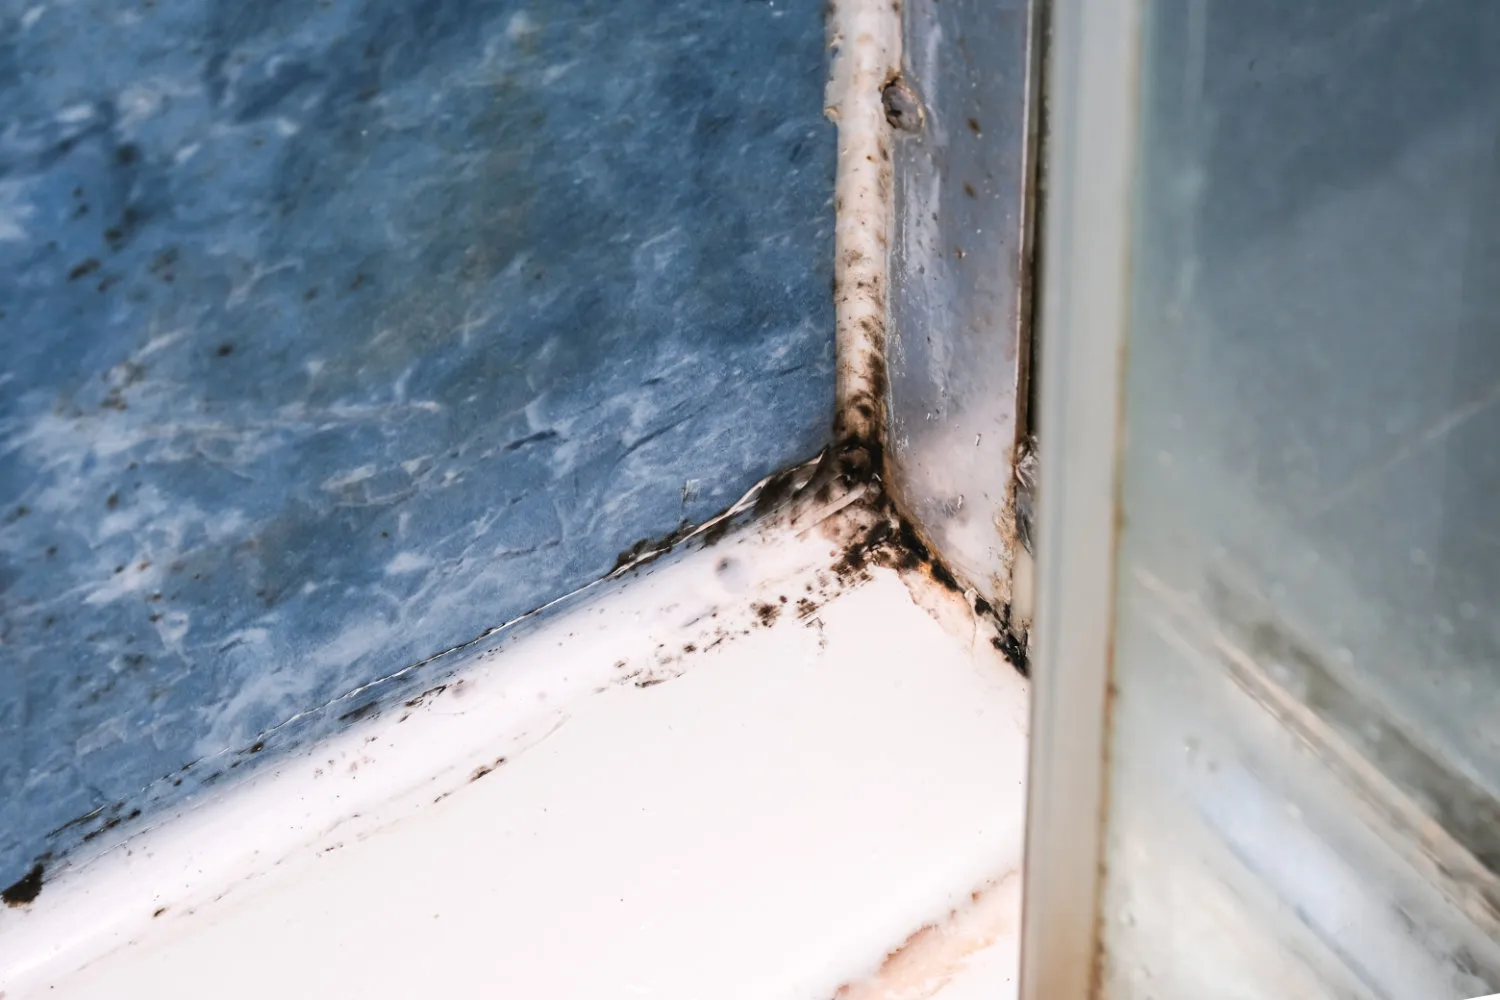 How To Get Rid Of Black Mold In The Shower (with one simple ingredient)